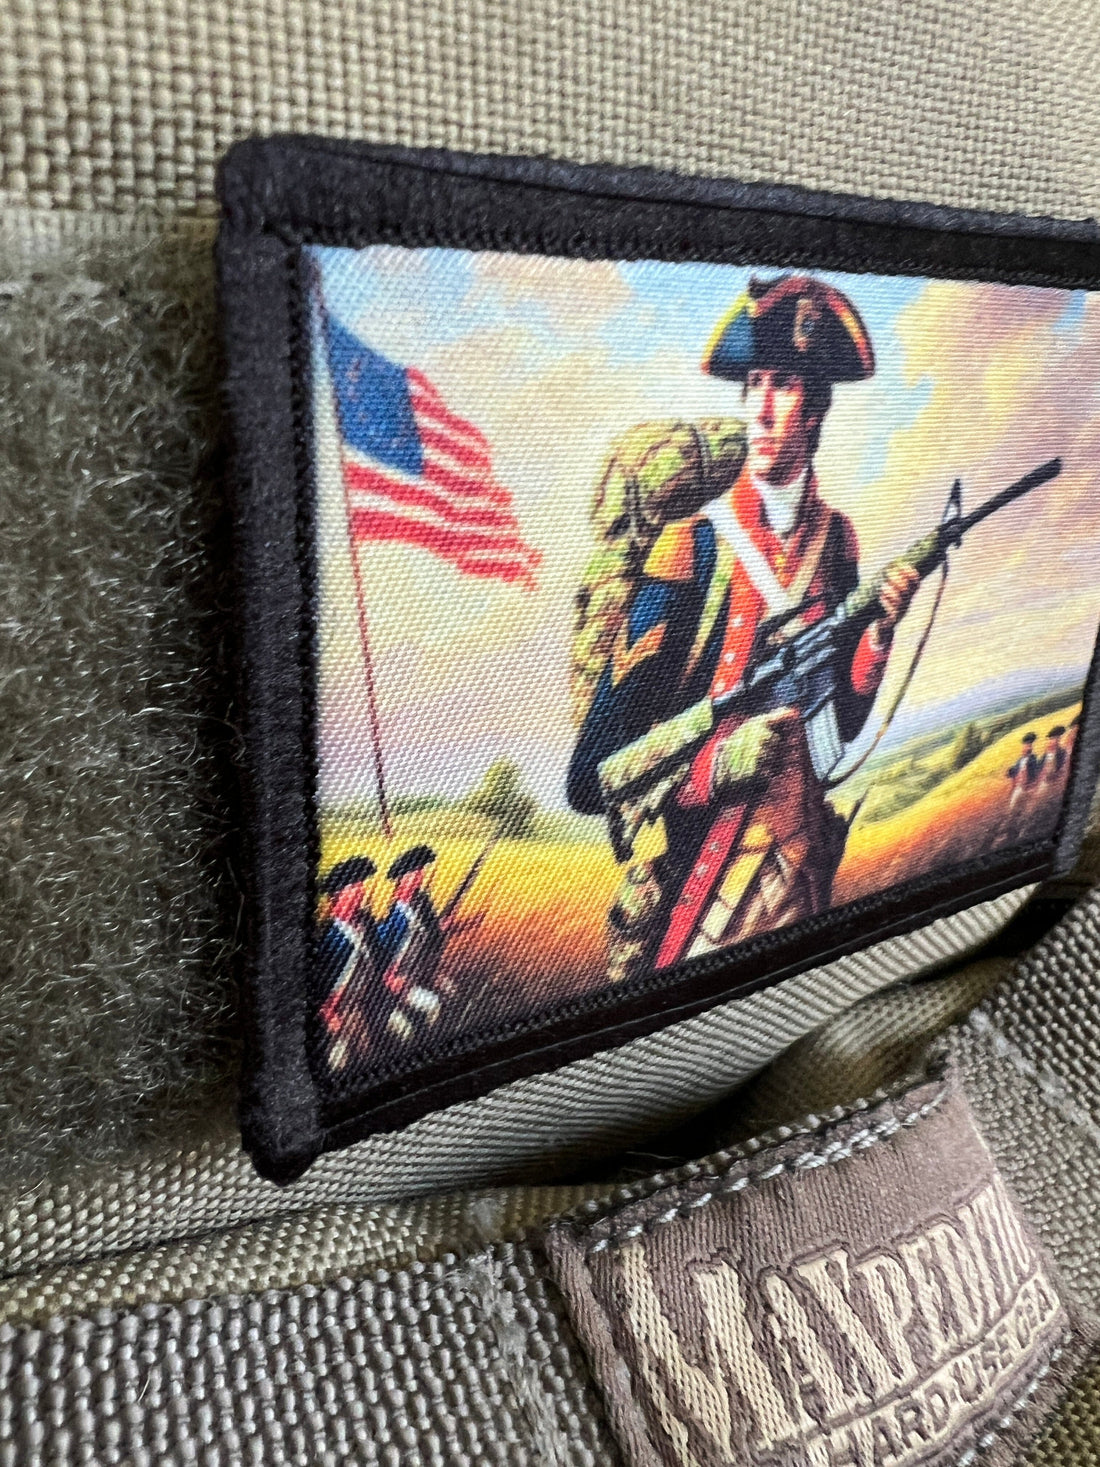 Blend History and Modernity with the Revolutionary Warrior: Modern Patriot Morale Patch